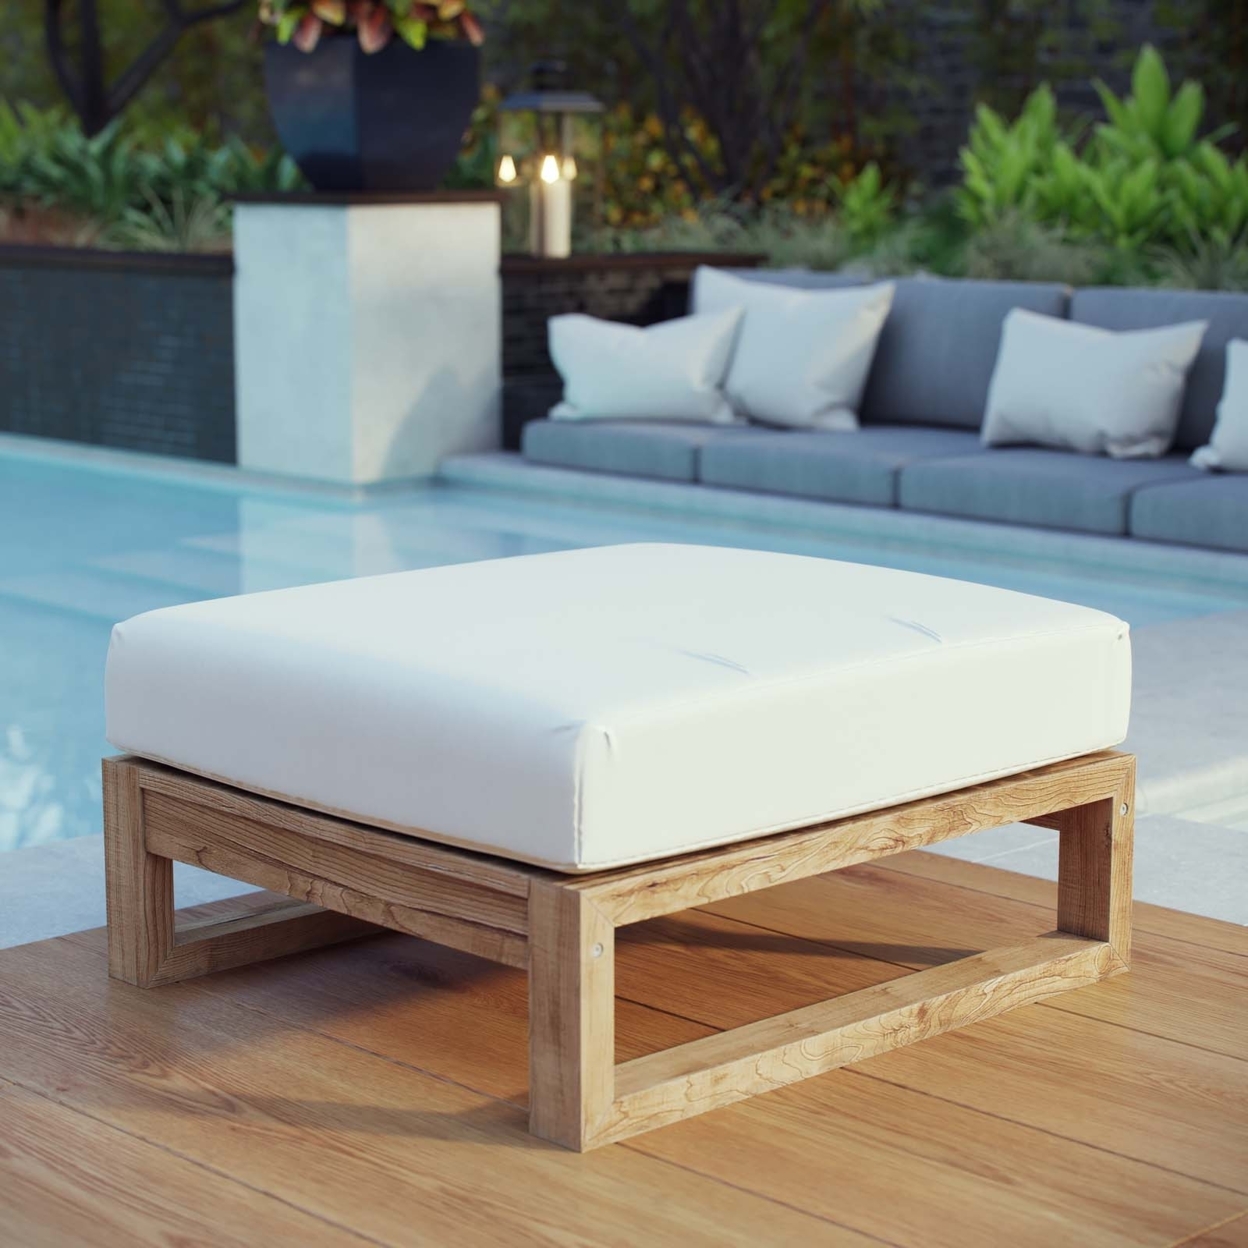 Modway Upland Outdoor Patio Teak Ottoman in Natural White - image 4 of 4